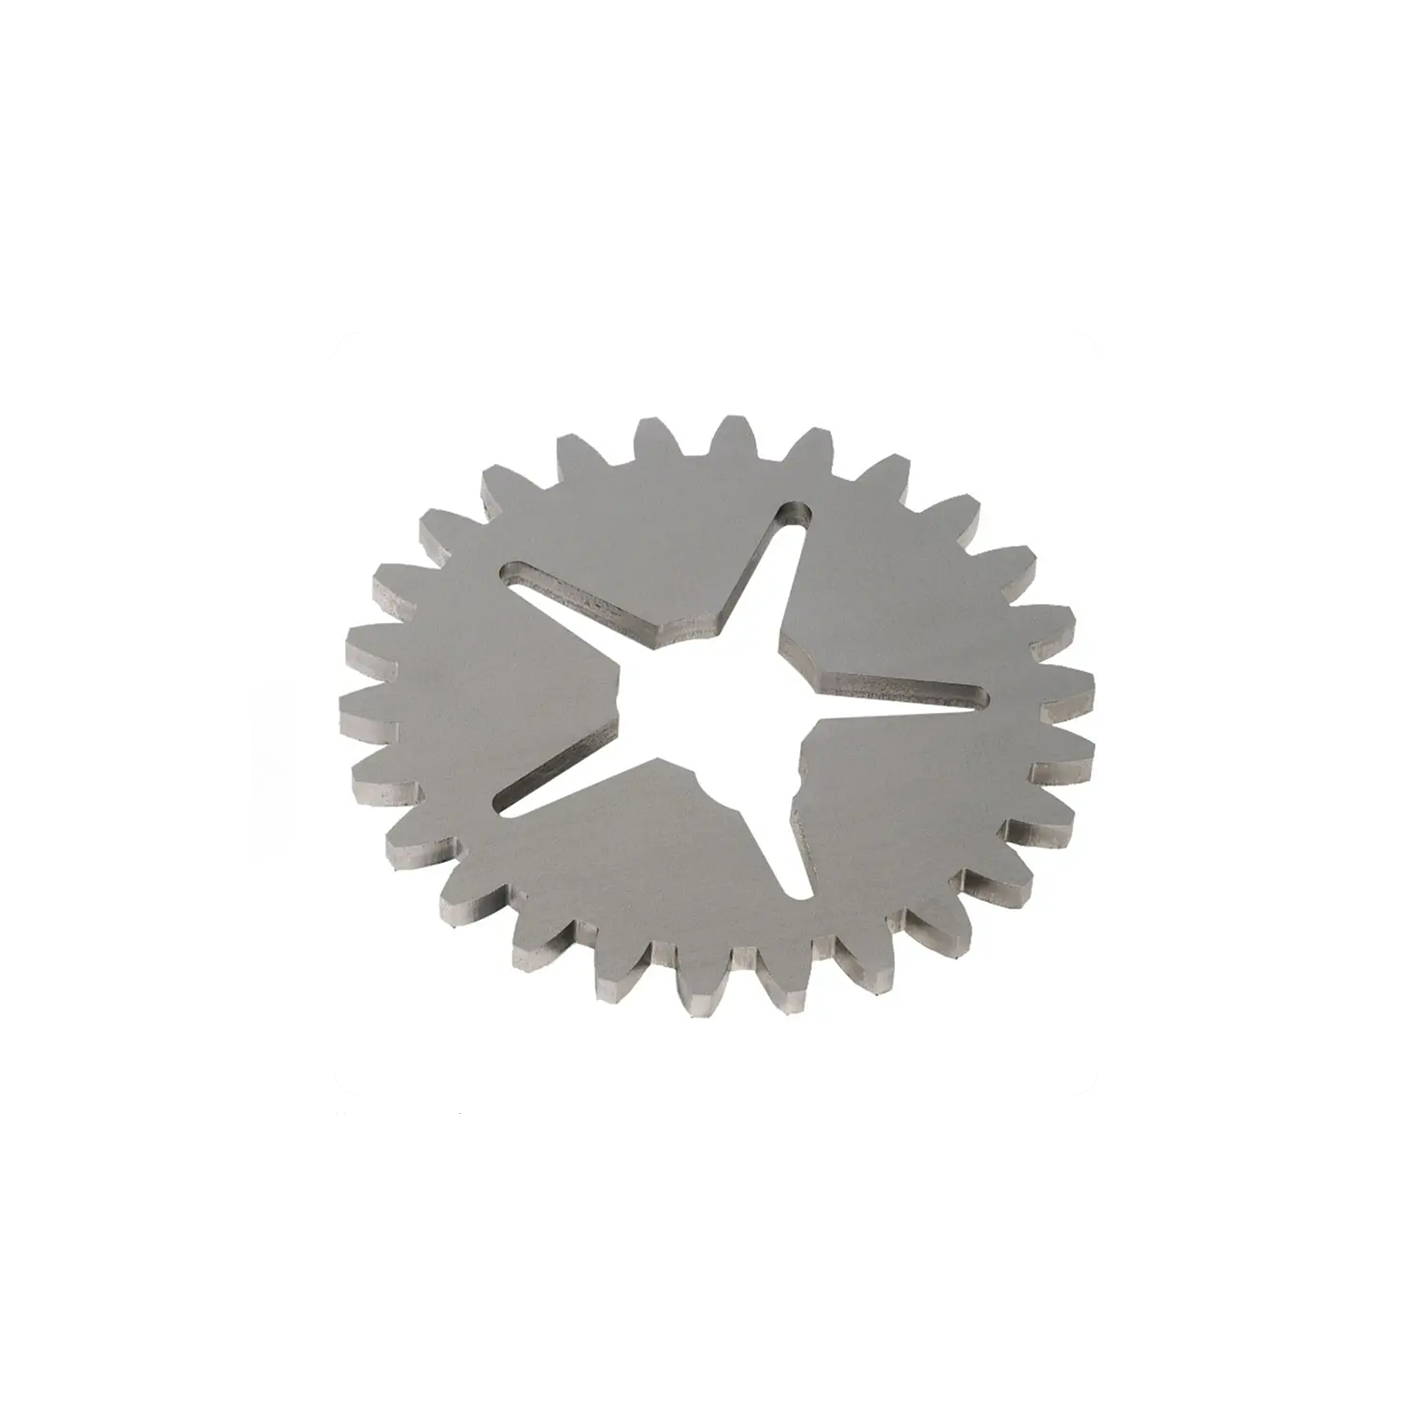 Customized processing of punched gear metal parts